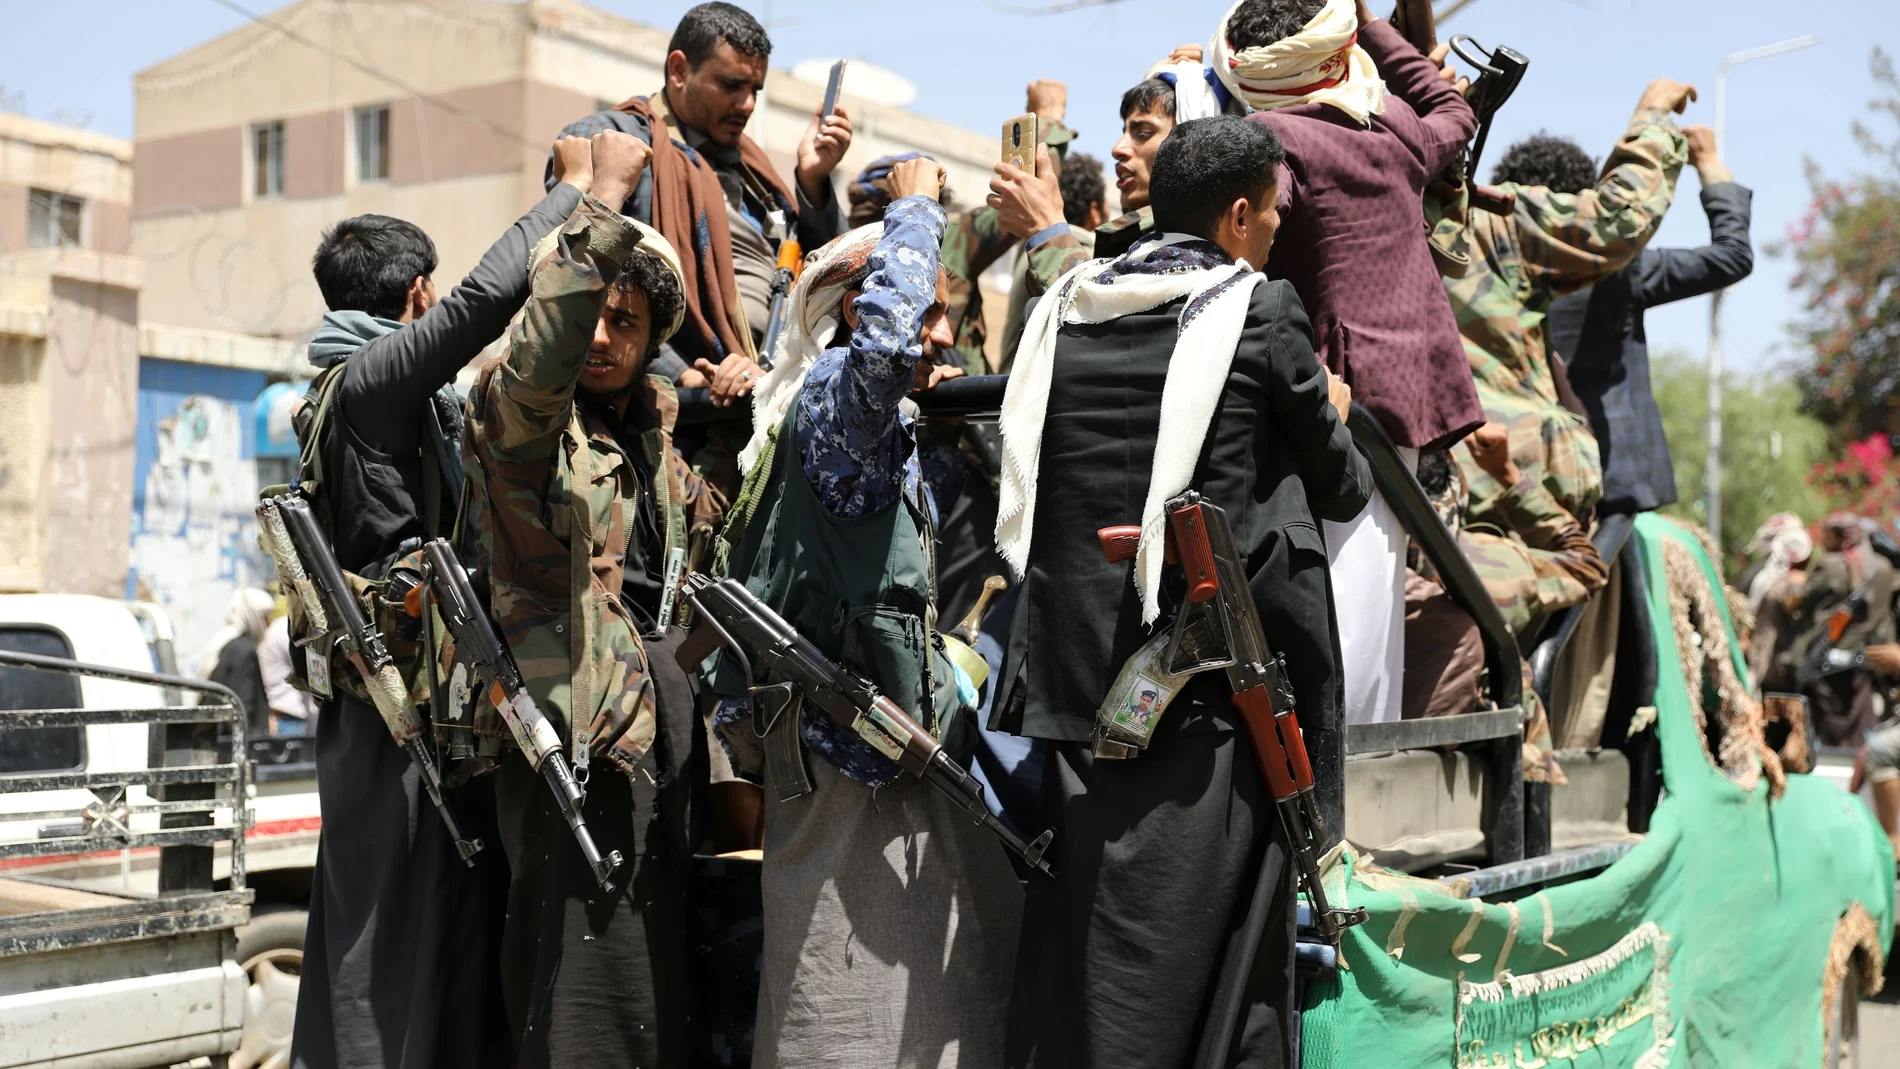 Armed Houthi followers ride on the back of a truck outside a hospital in Sanaa